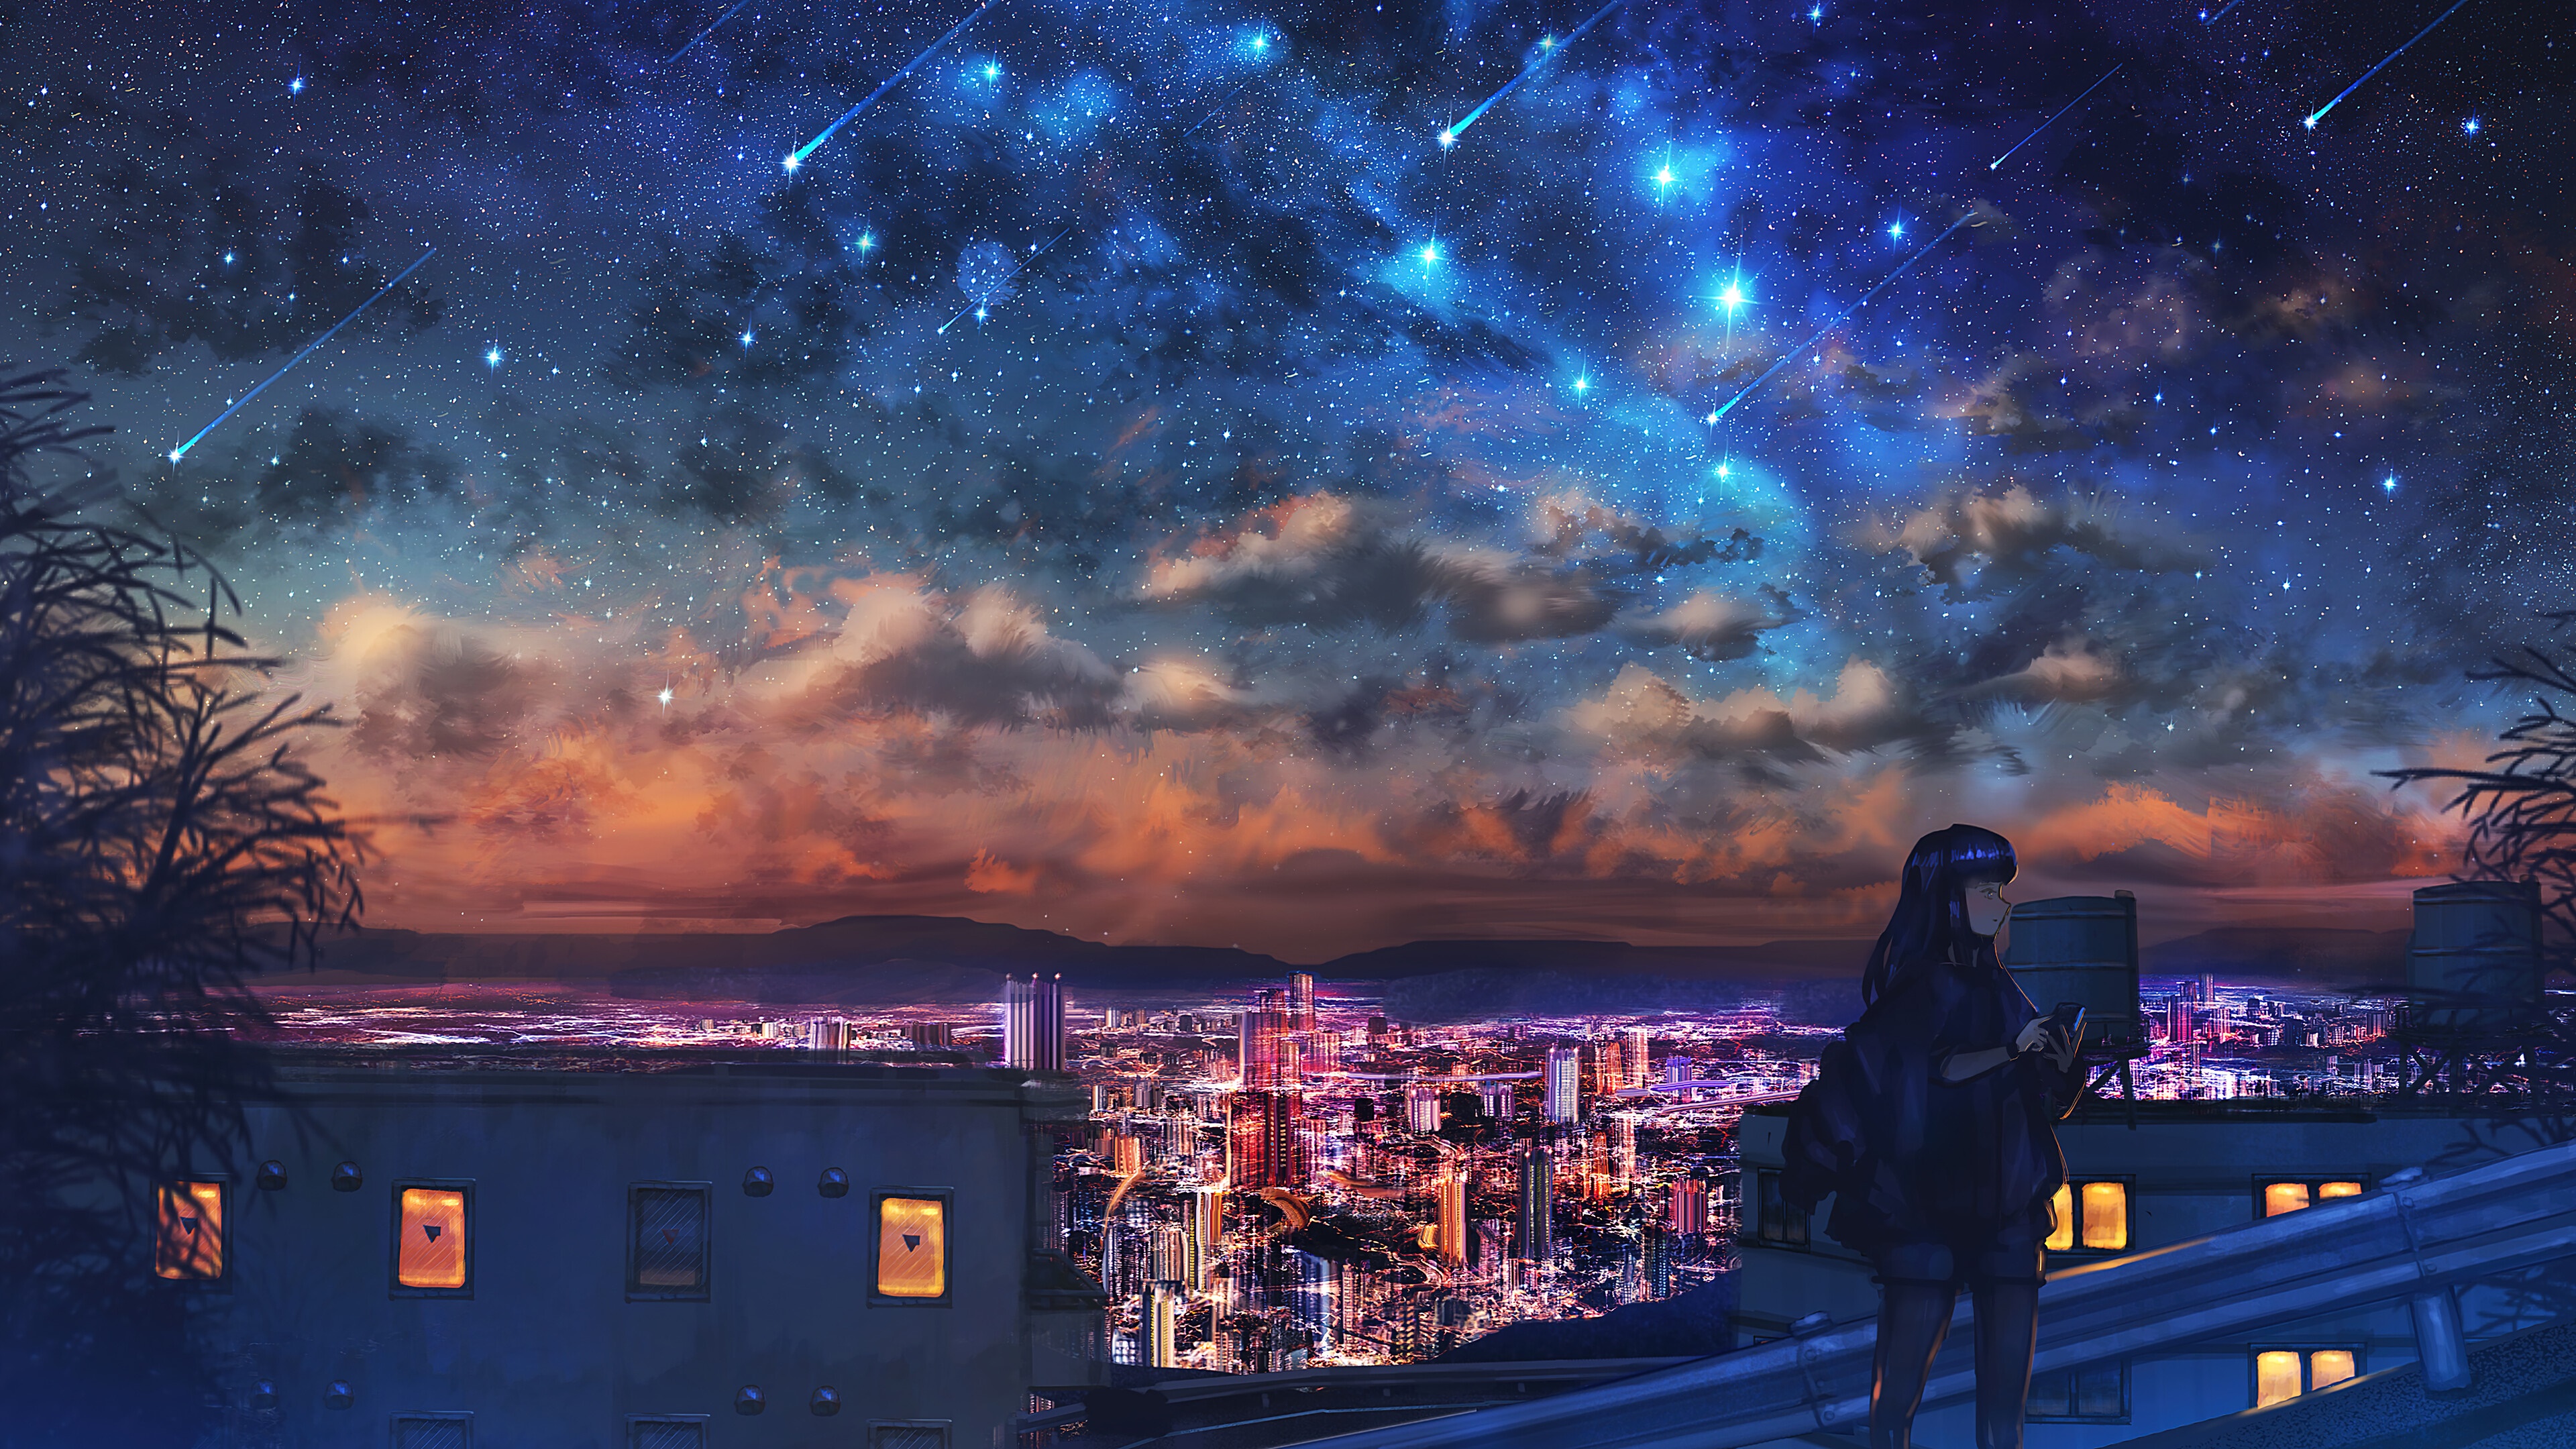 City Of Stars Wallpapers - Wallpaper Cave